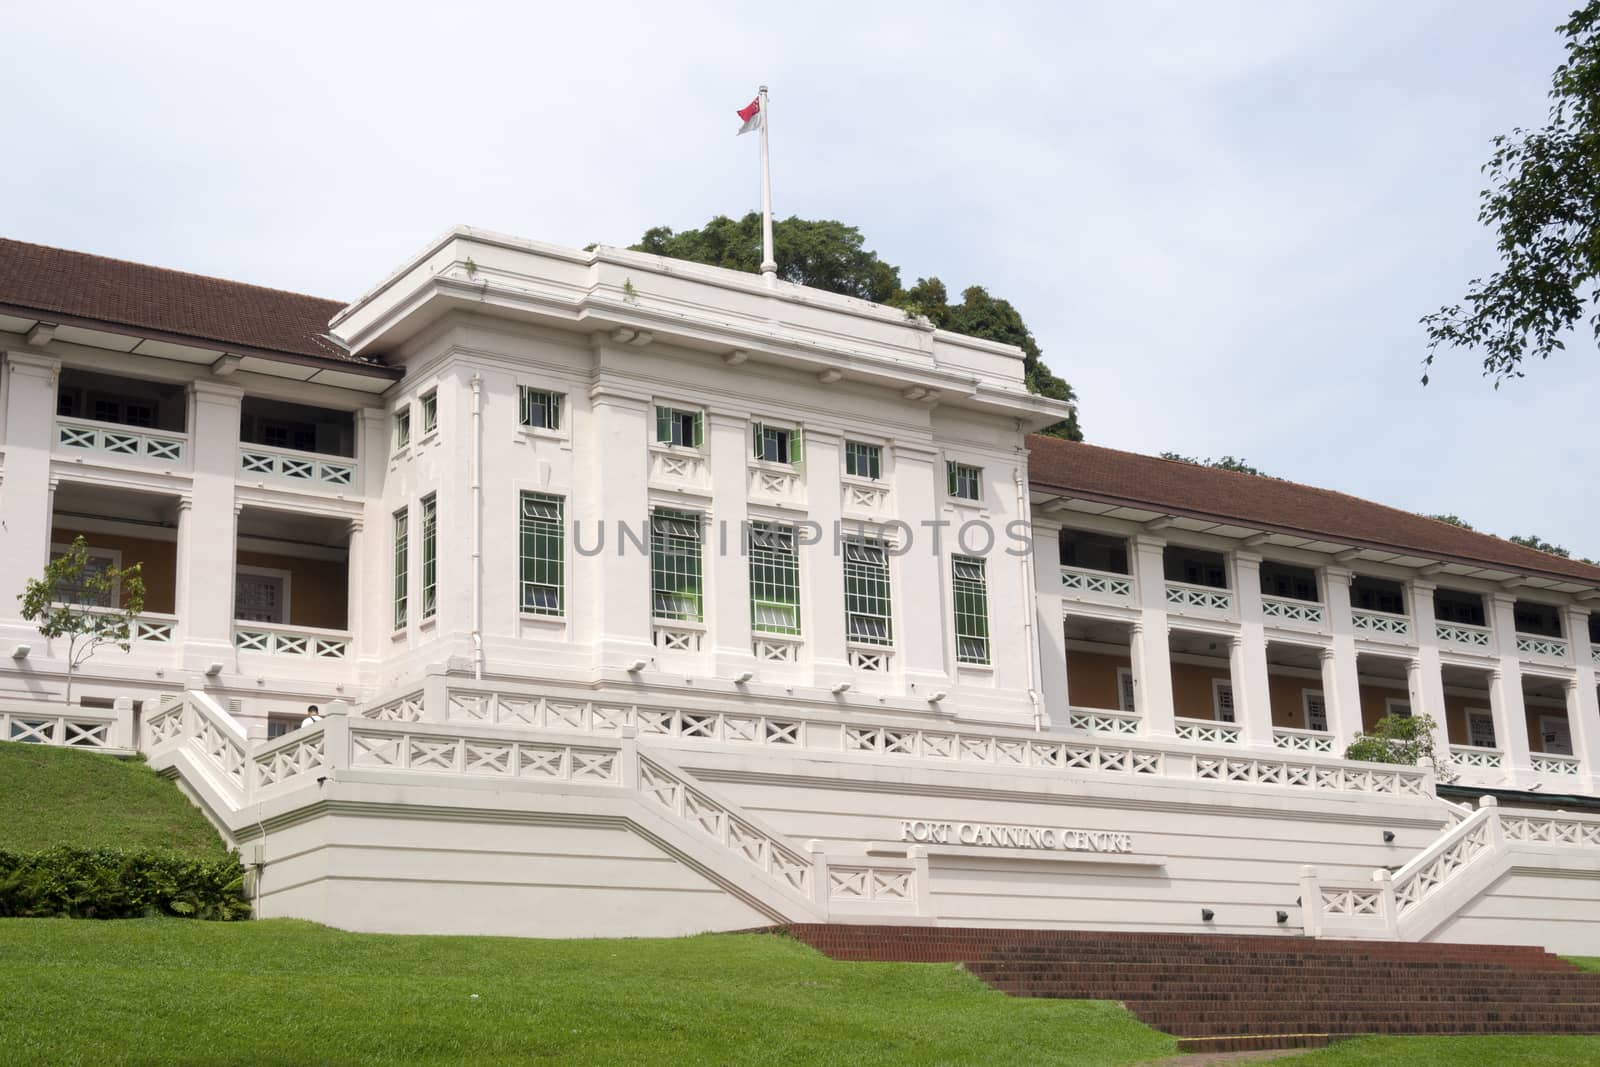 Fort Canning Centre by yuriz